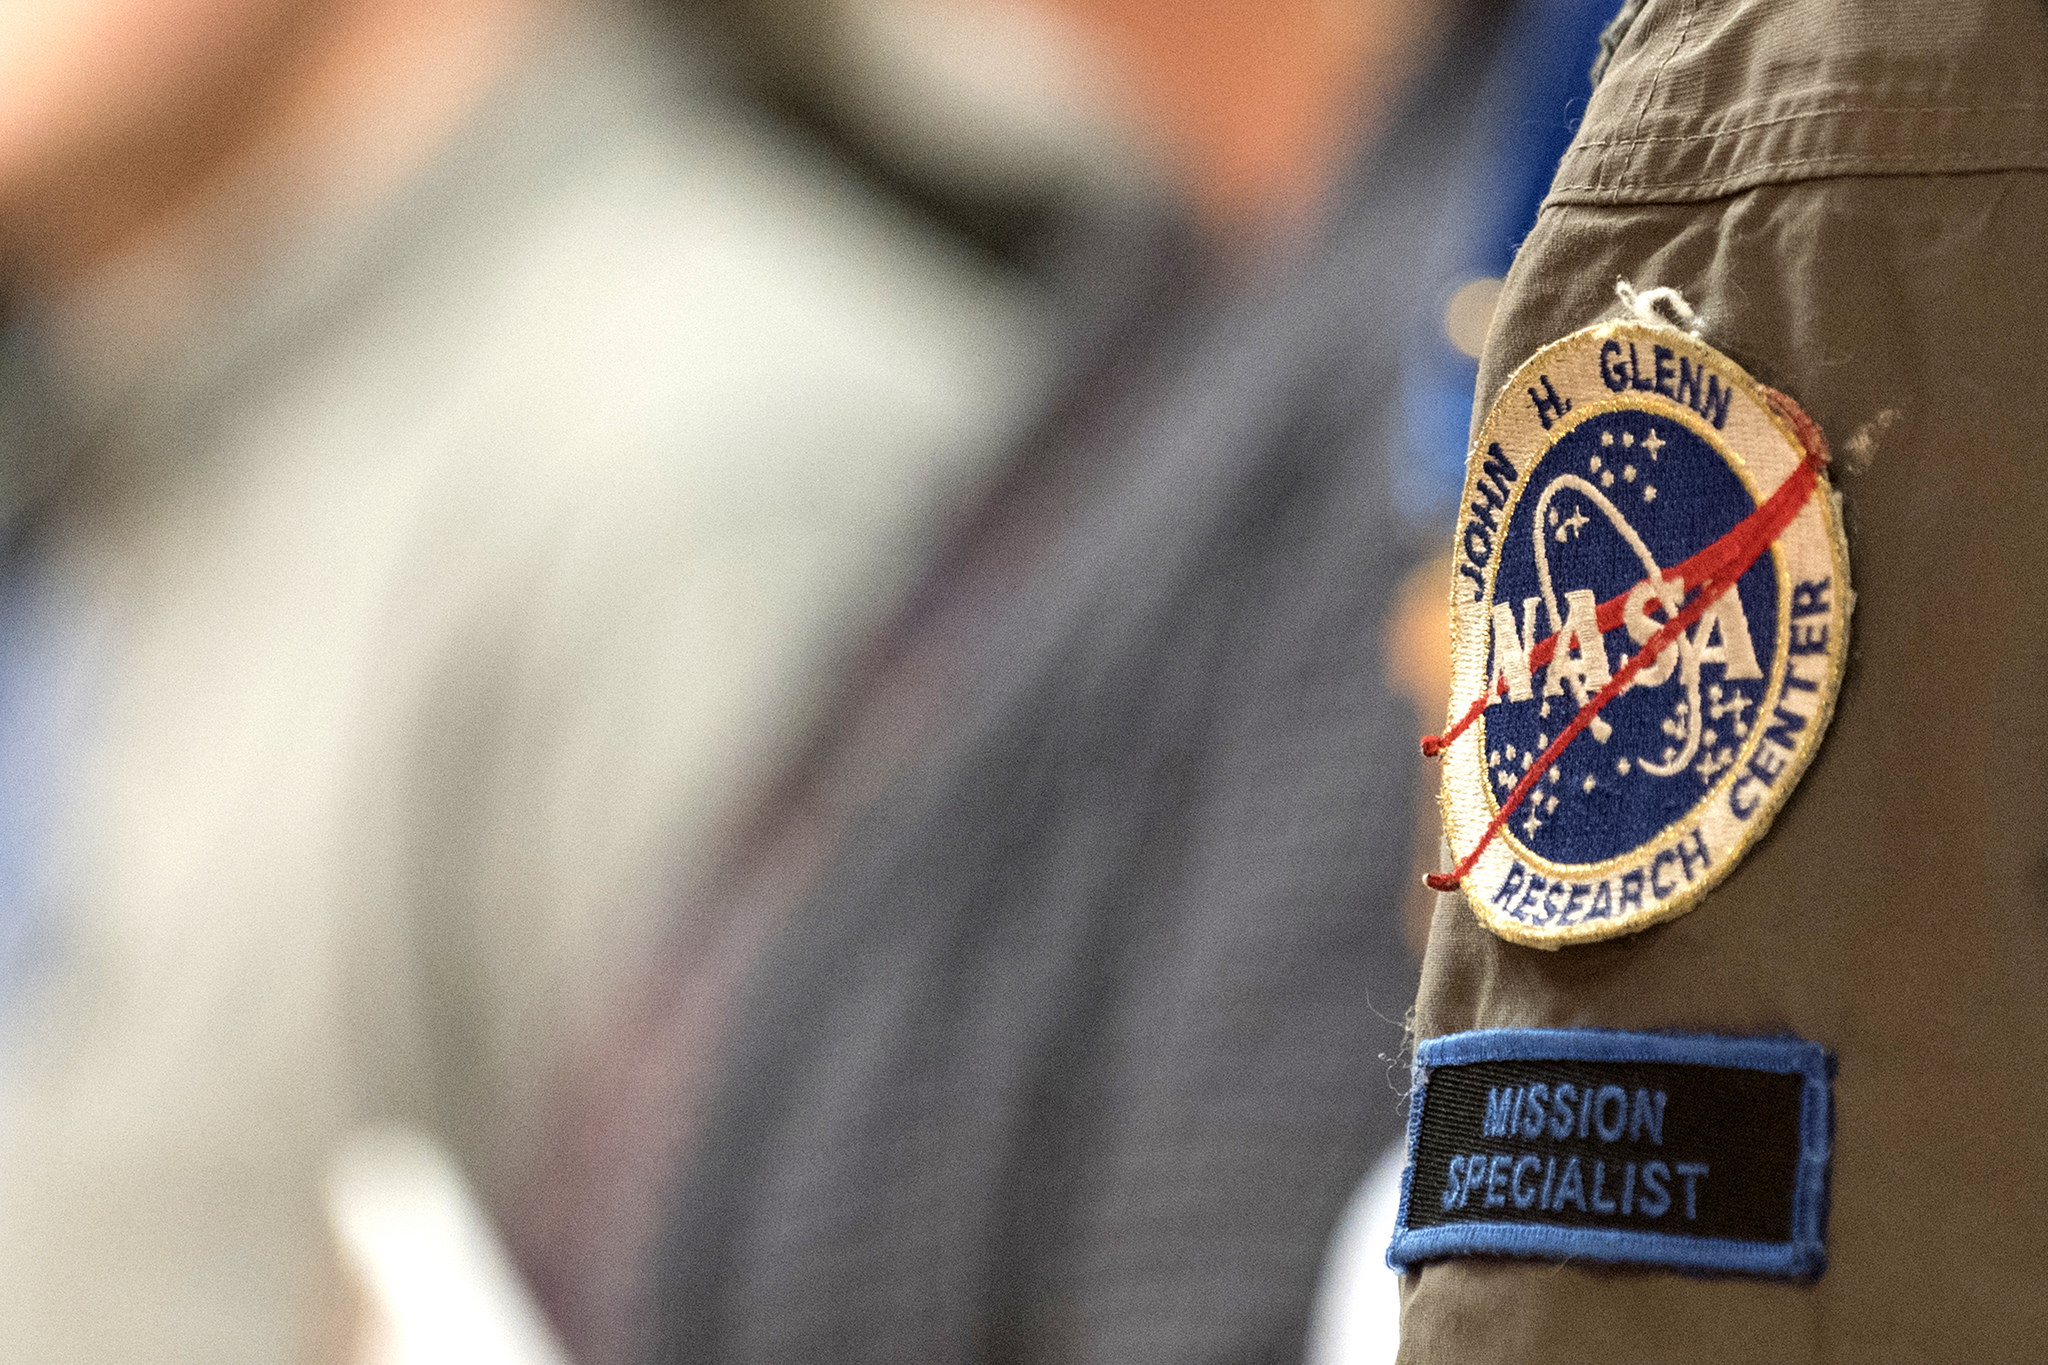 Engineers from NASA recently visited UofL to encourage students to enter the STEM fields.